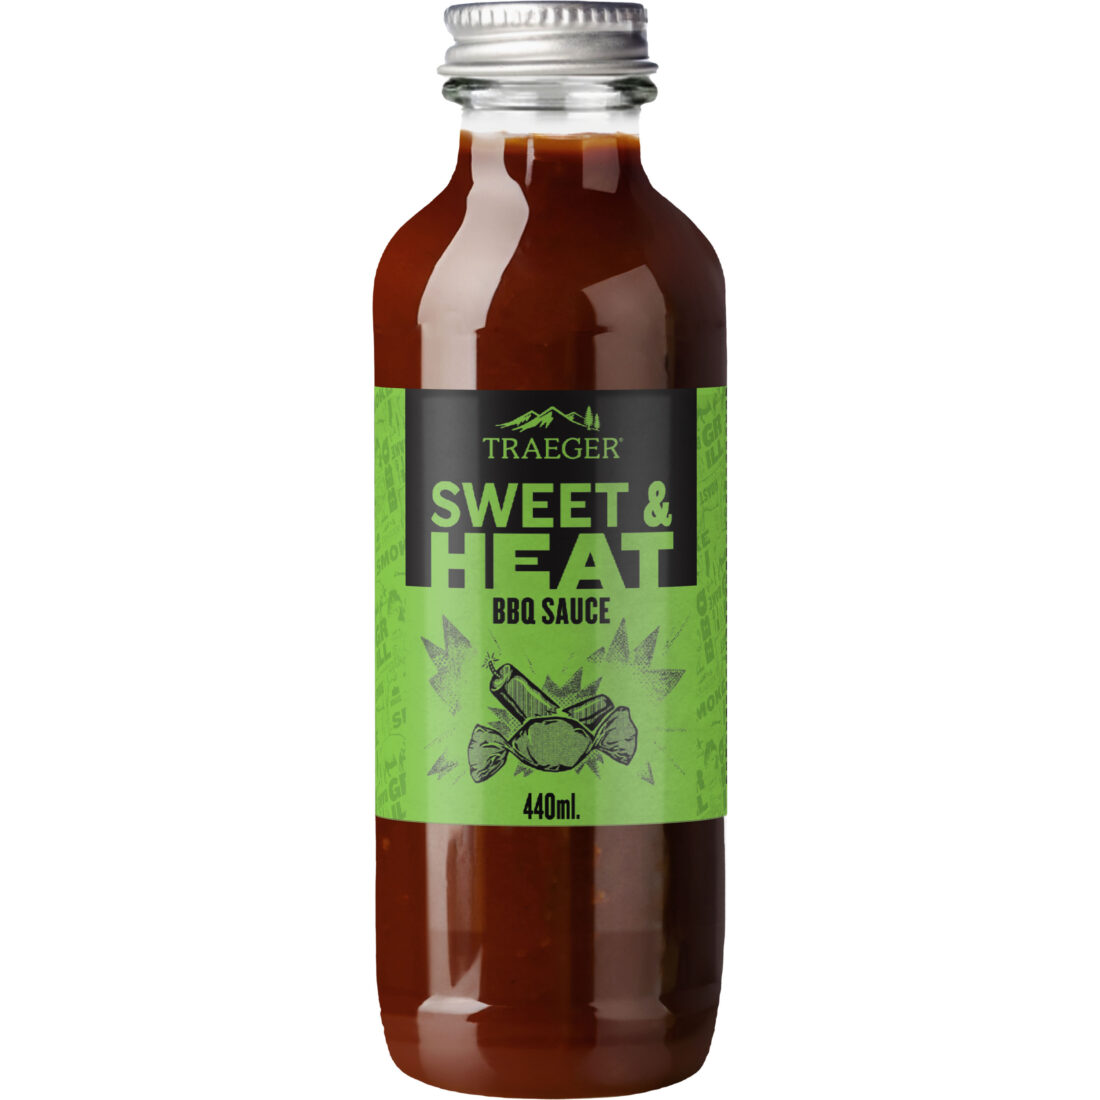 TRAEGER Sauces Sweet and Heat